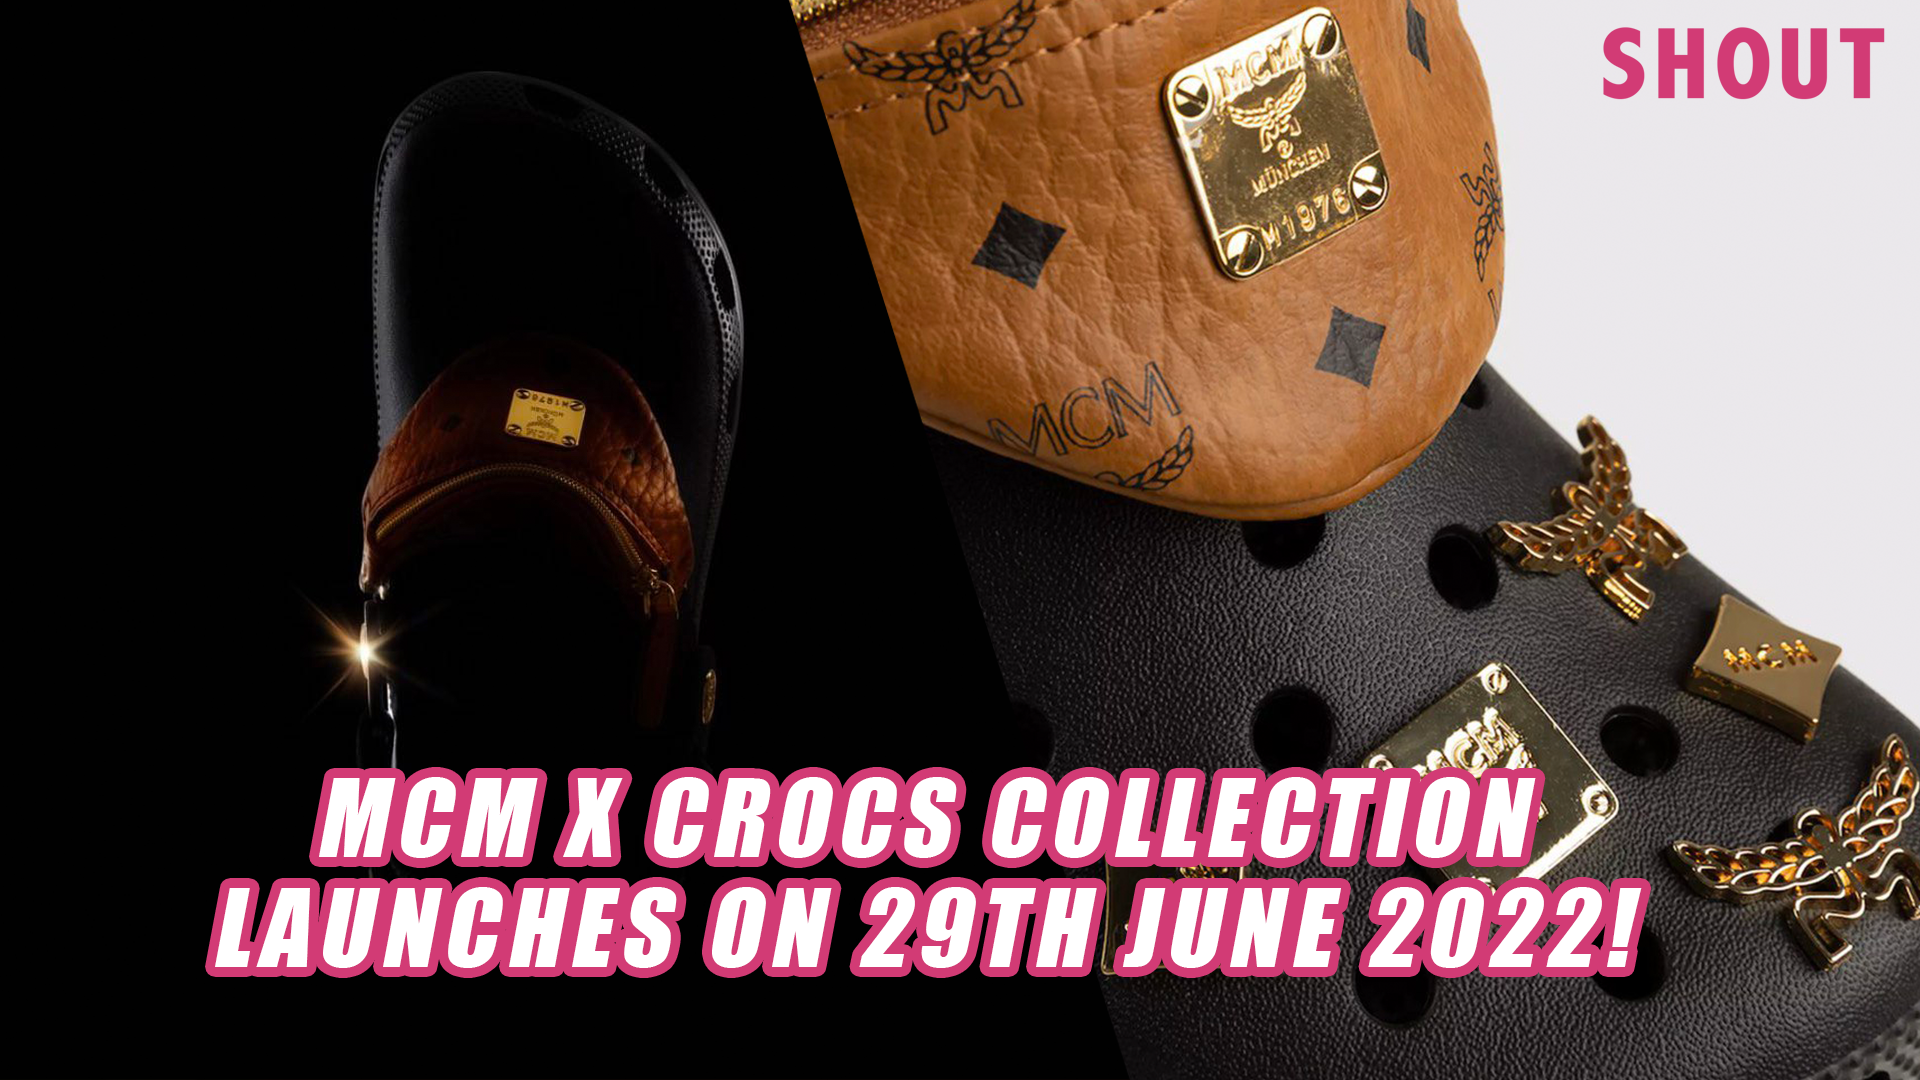 EXCLUSIVE MCM X CROCS COLLECTION AVAILABLE FOR PURCHASE ONLINE ON 29TH JUNE  2022! - Shout